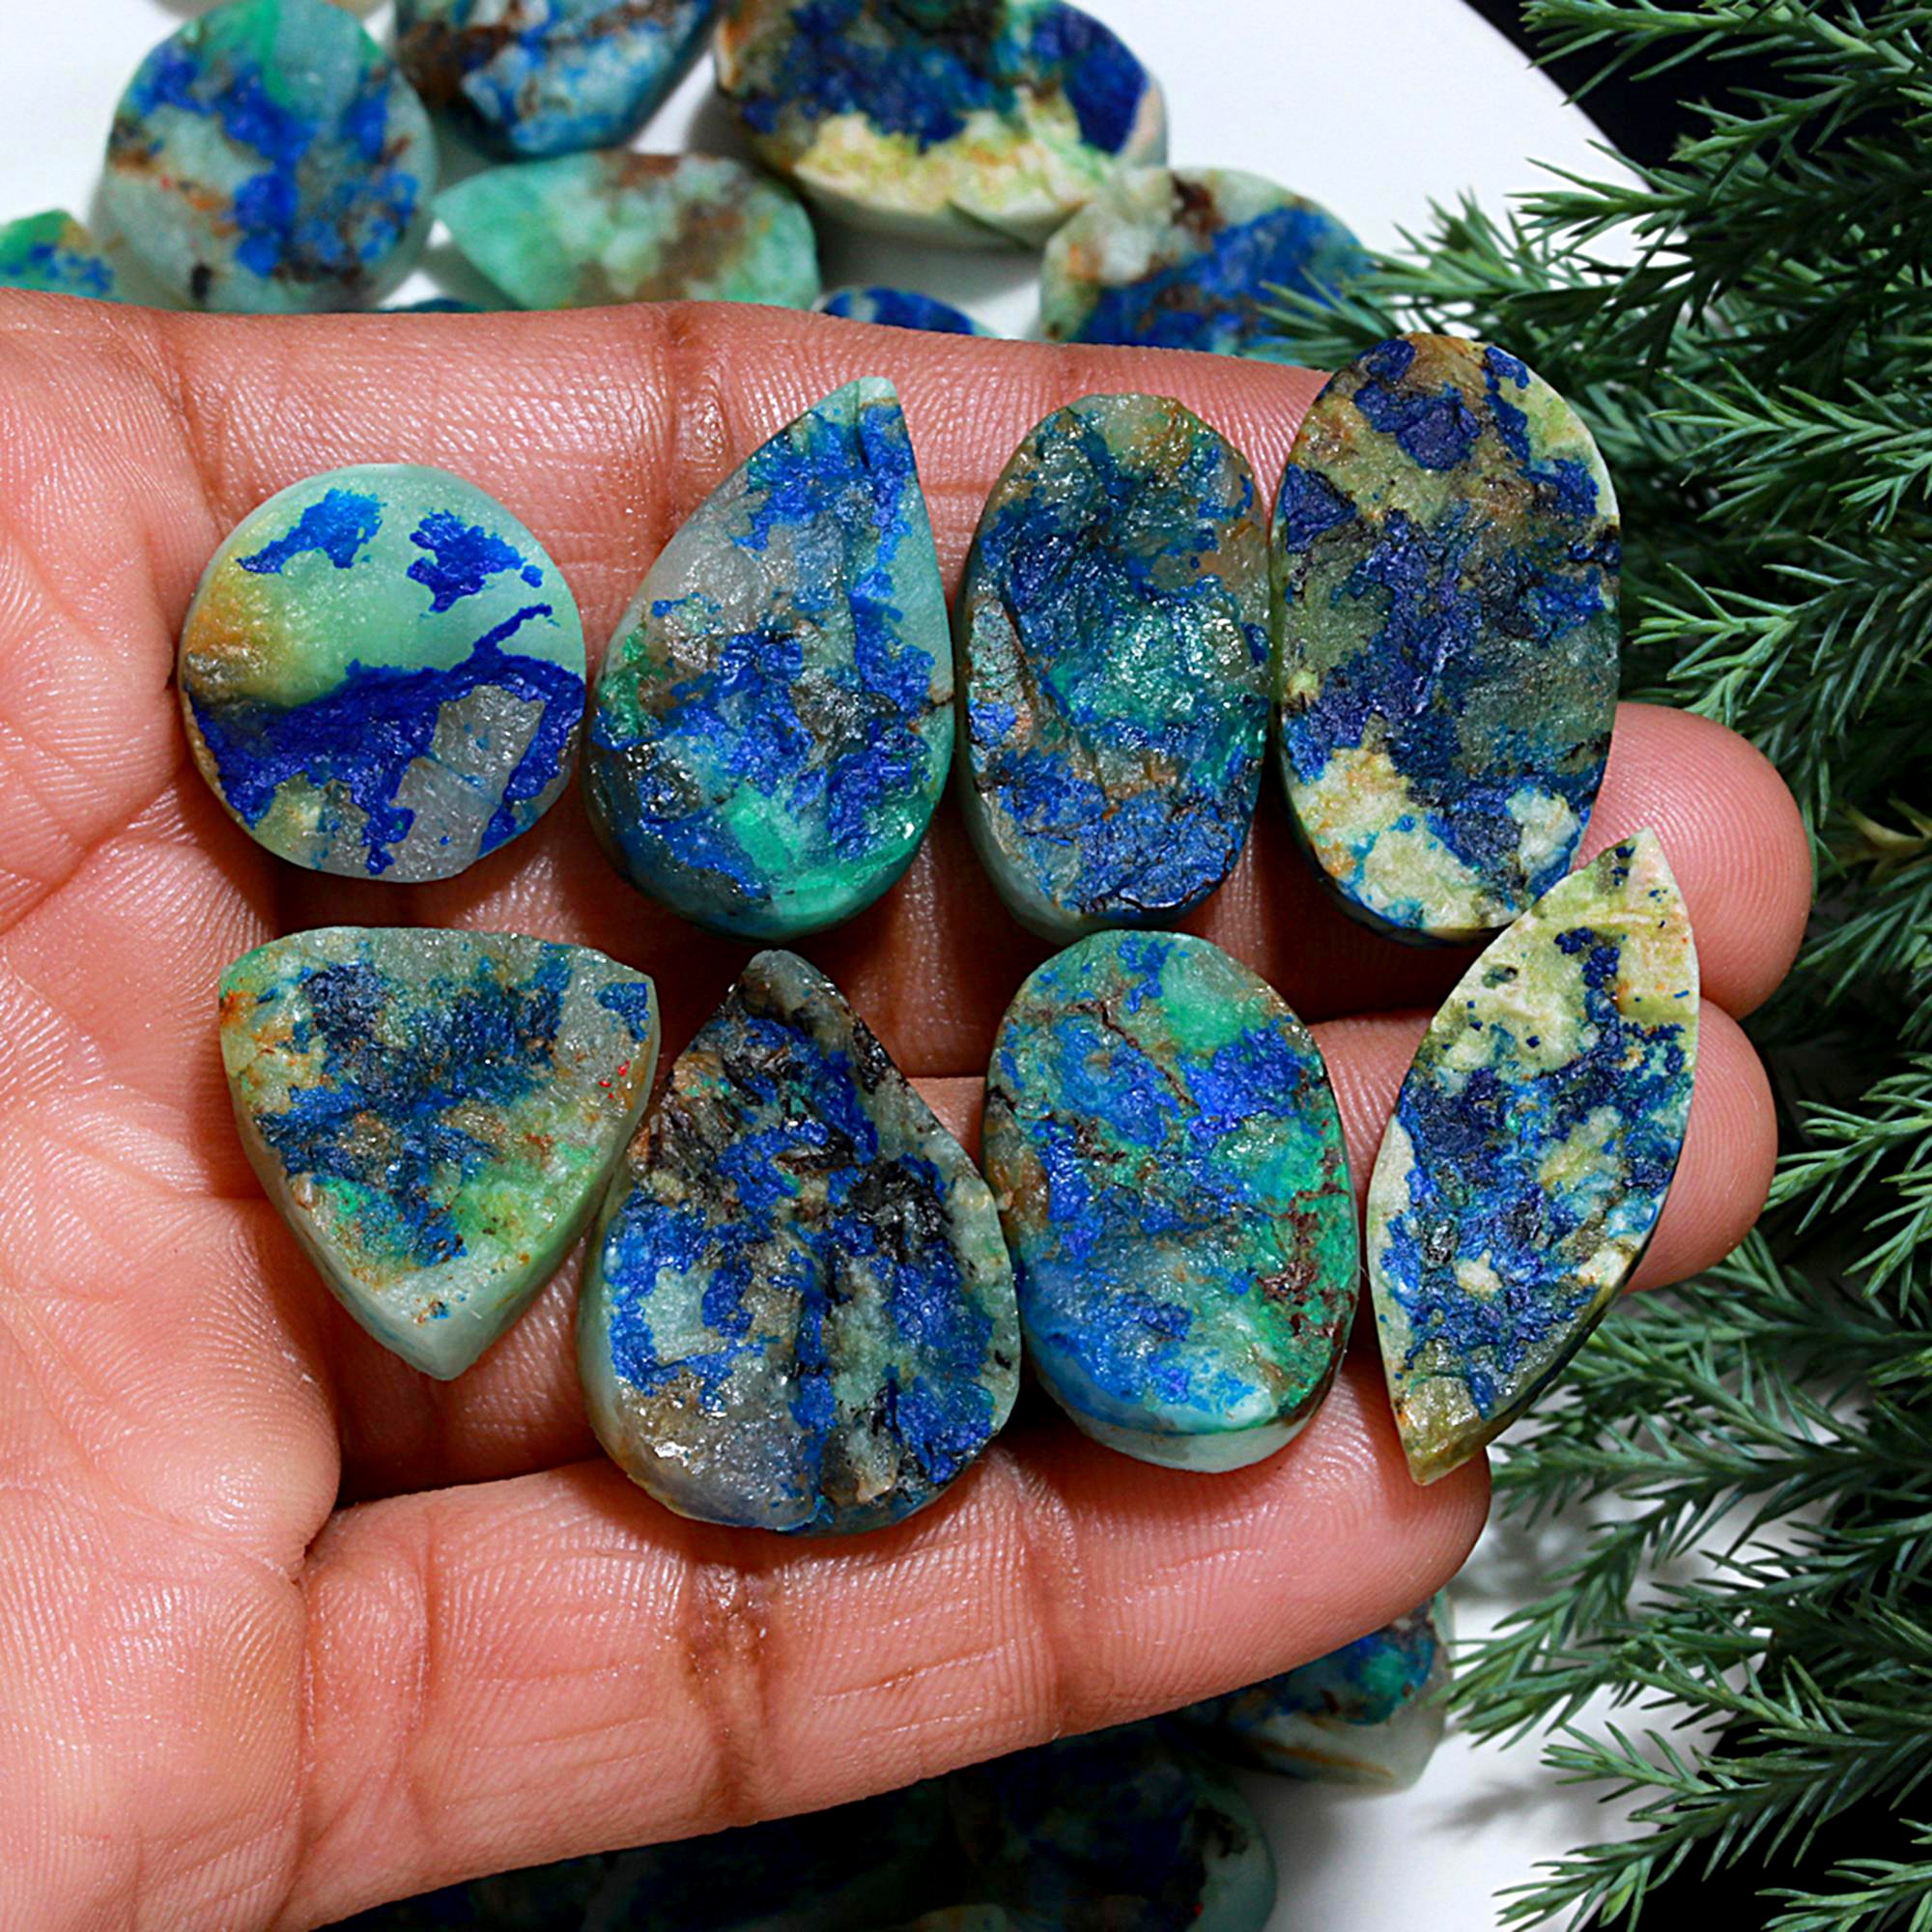 85 Pcs 1200.Cts Natural Azurite Druzy Unpolished Loose Cabochon Gemstone For Jewelry Wholesale Lot Size 30x12 14x13mm